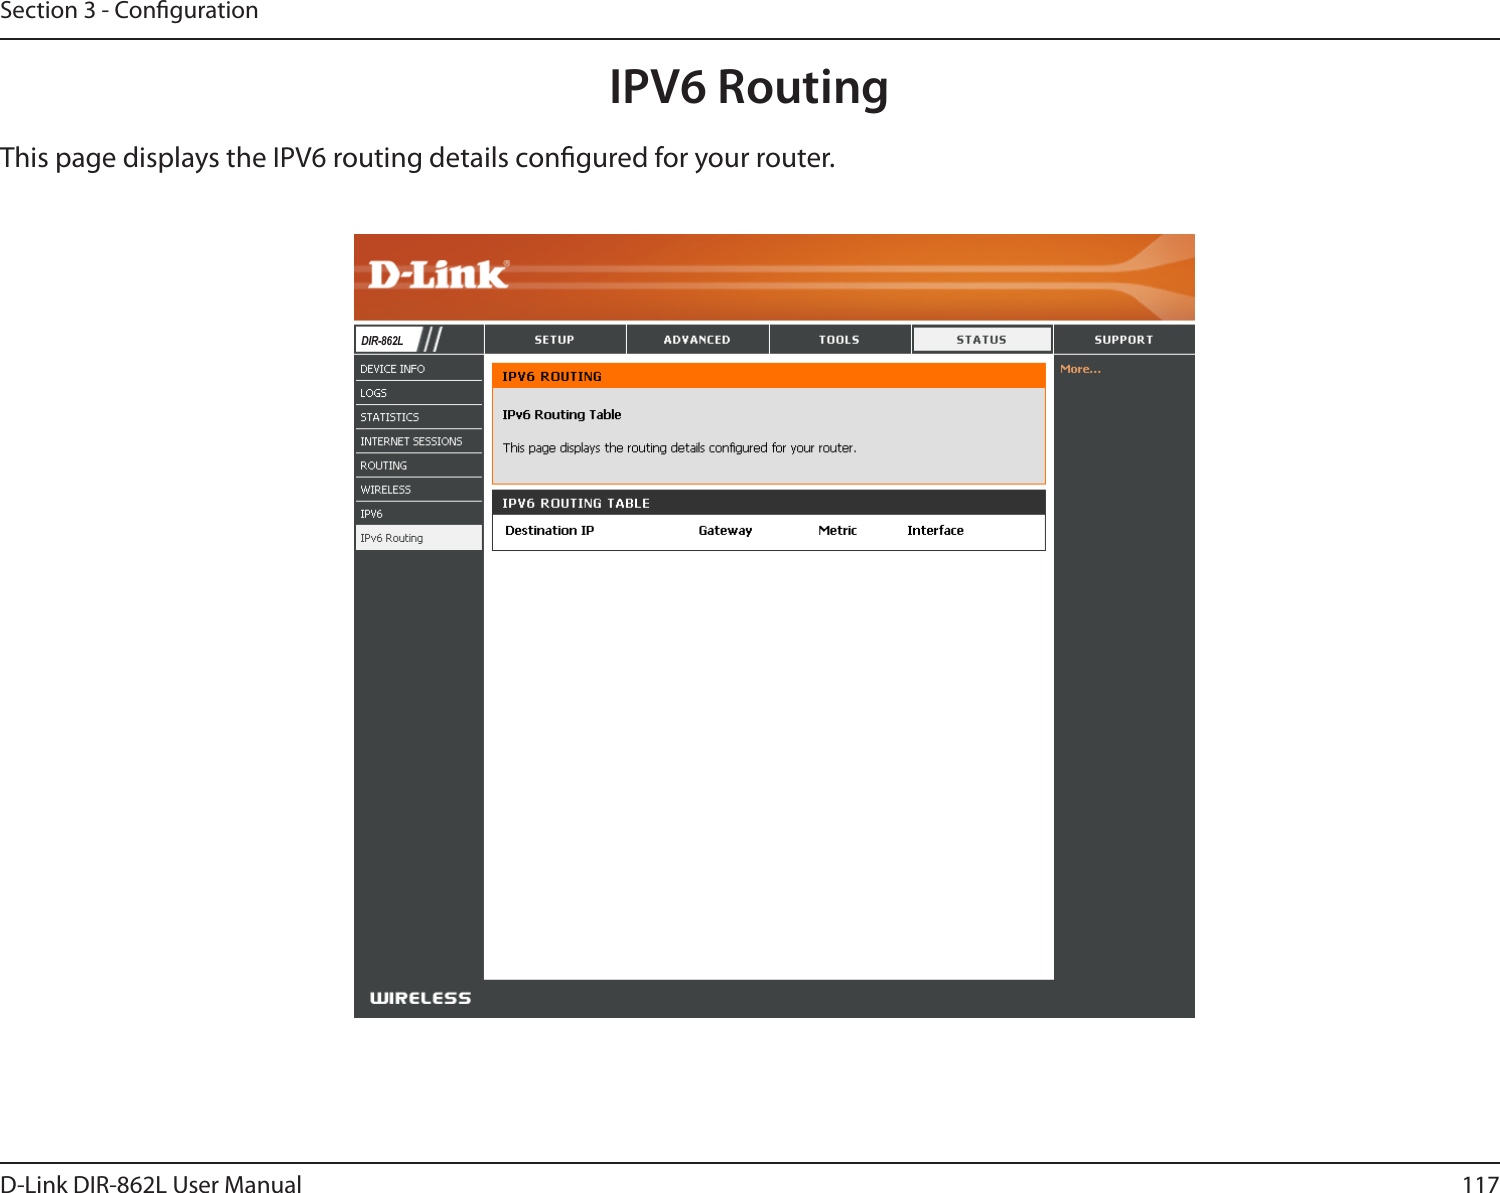 117D-Link DIR-862L User ManualSection 3 - CongurationIPV6 RoutingThis page displays the IPV6 routing details congured for your router. DIR-862L